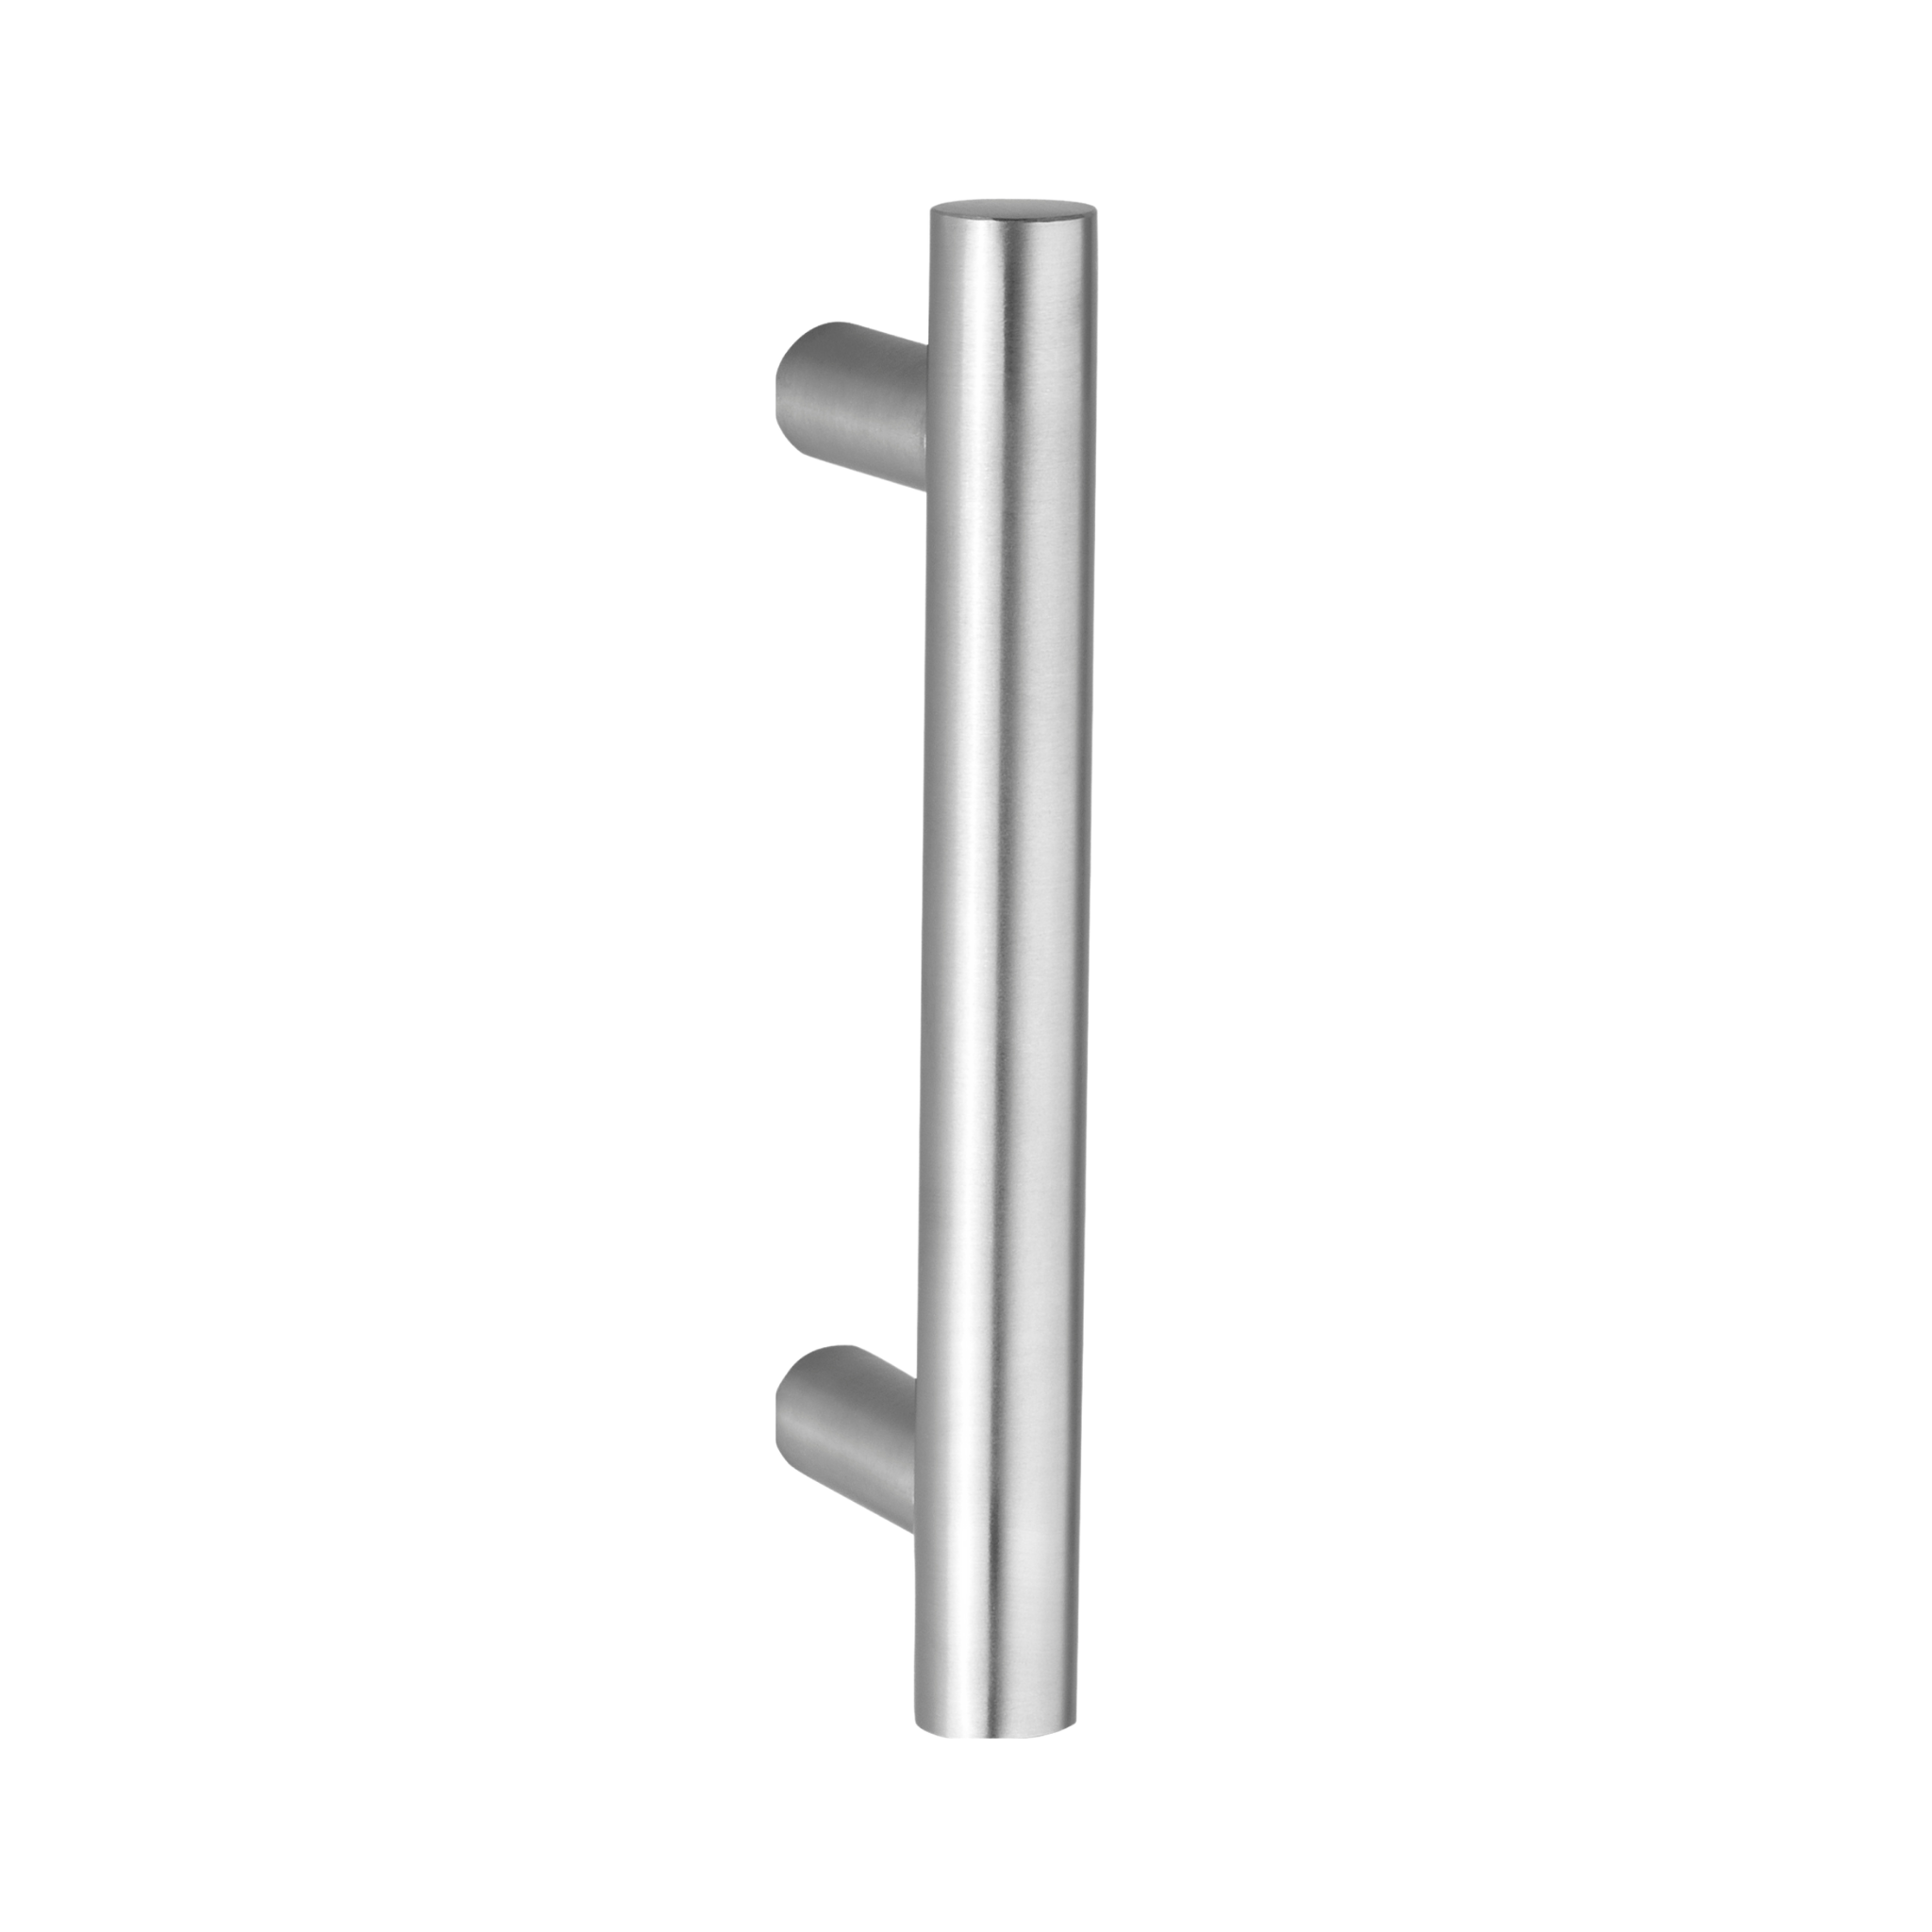 FP.T07.BB.TR, Pull Handle, Tubular, T Handle, BTB, 32mm (Ø) x 1800mm (l) x 1275mm (ctc), Stainless Steel with Tarnish Resistant, CISA